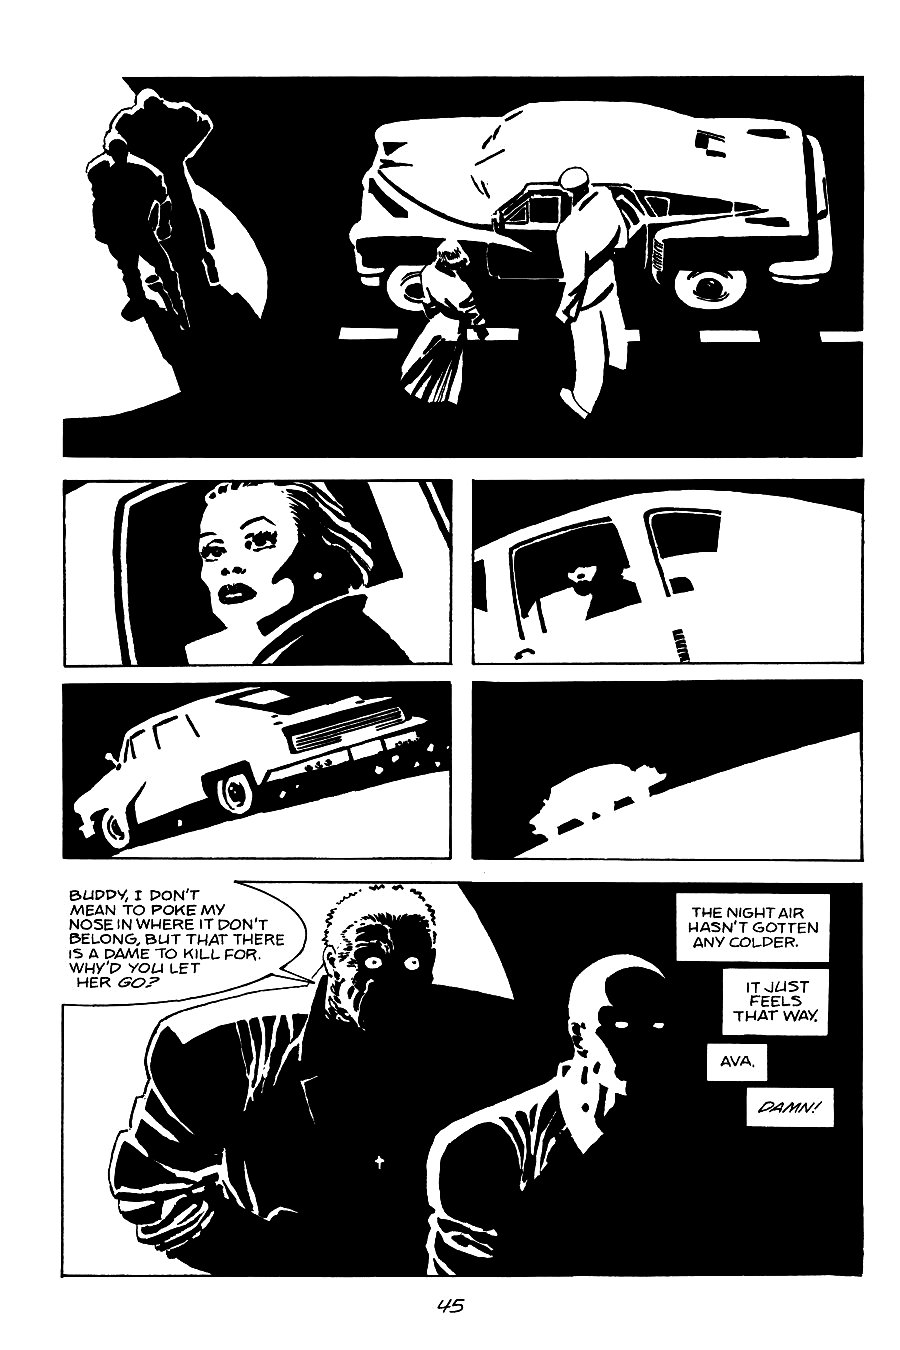 page 45 of sin city 2 the hard goodbye